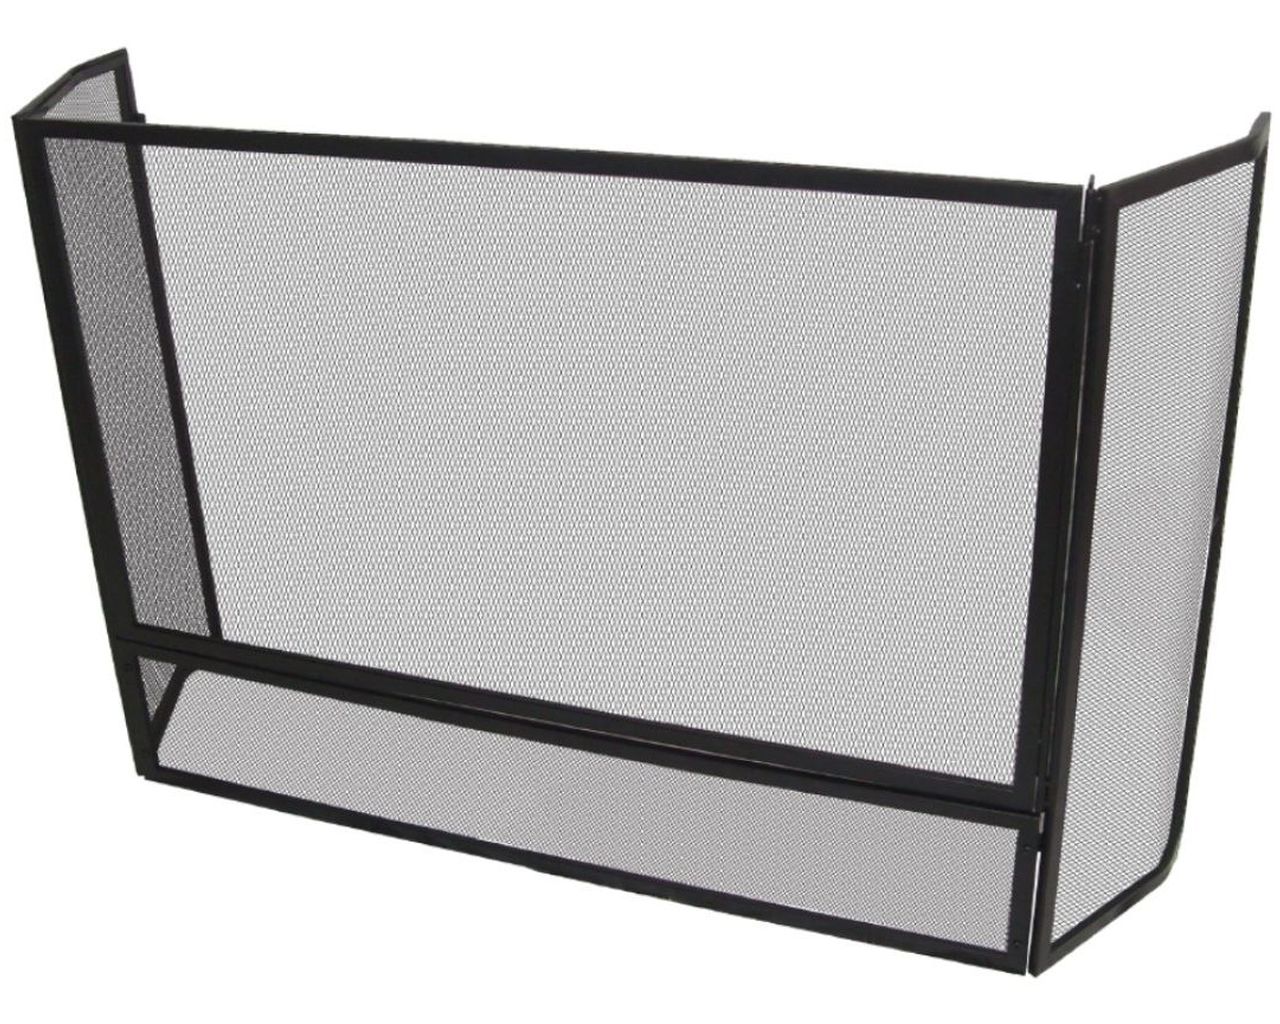 Maxiheat Mesh Child Guard - In-Built, , hi-res image number null